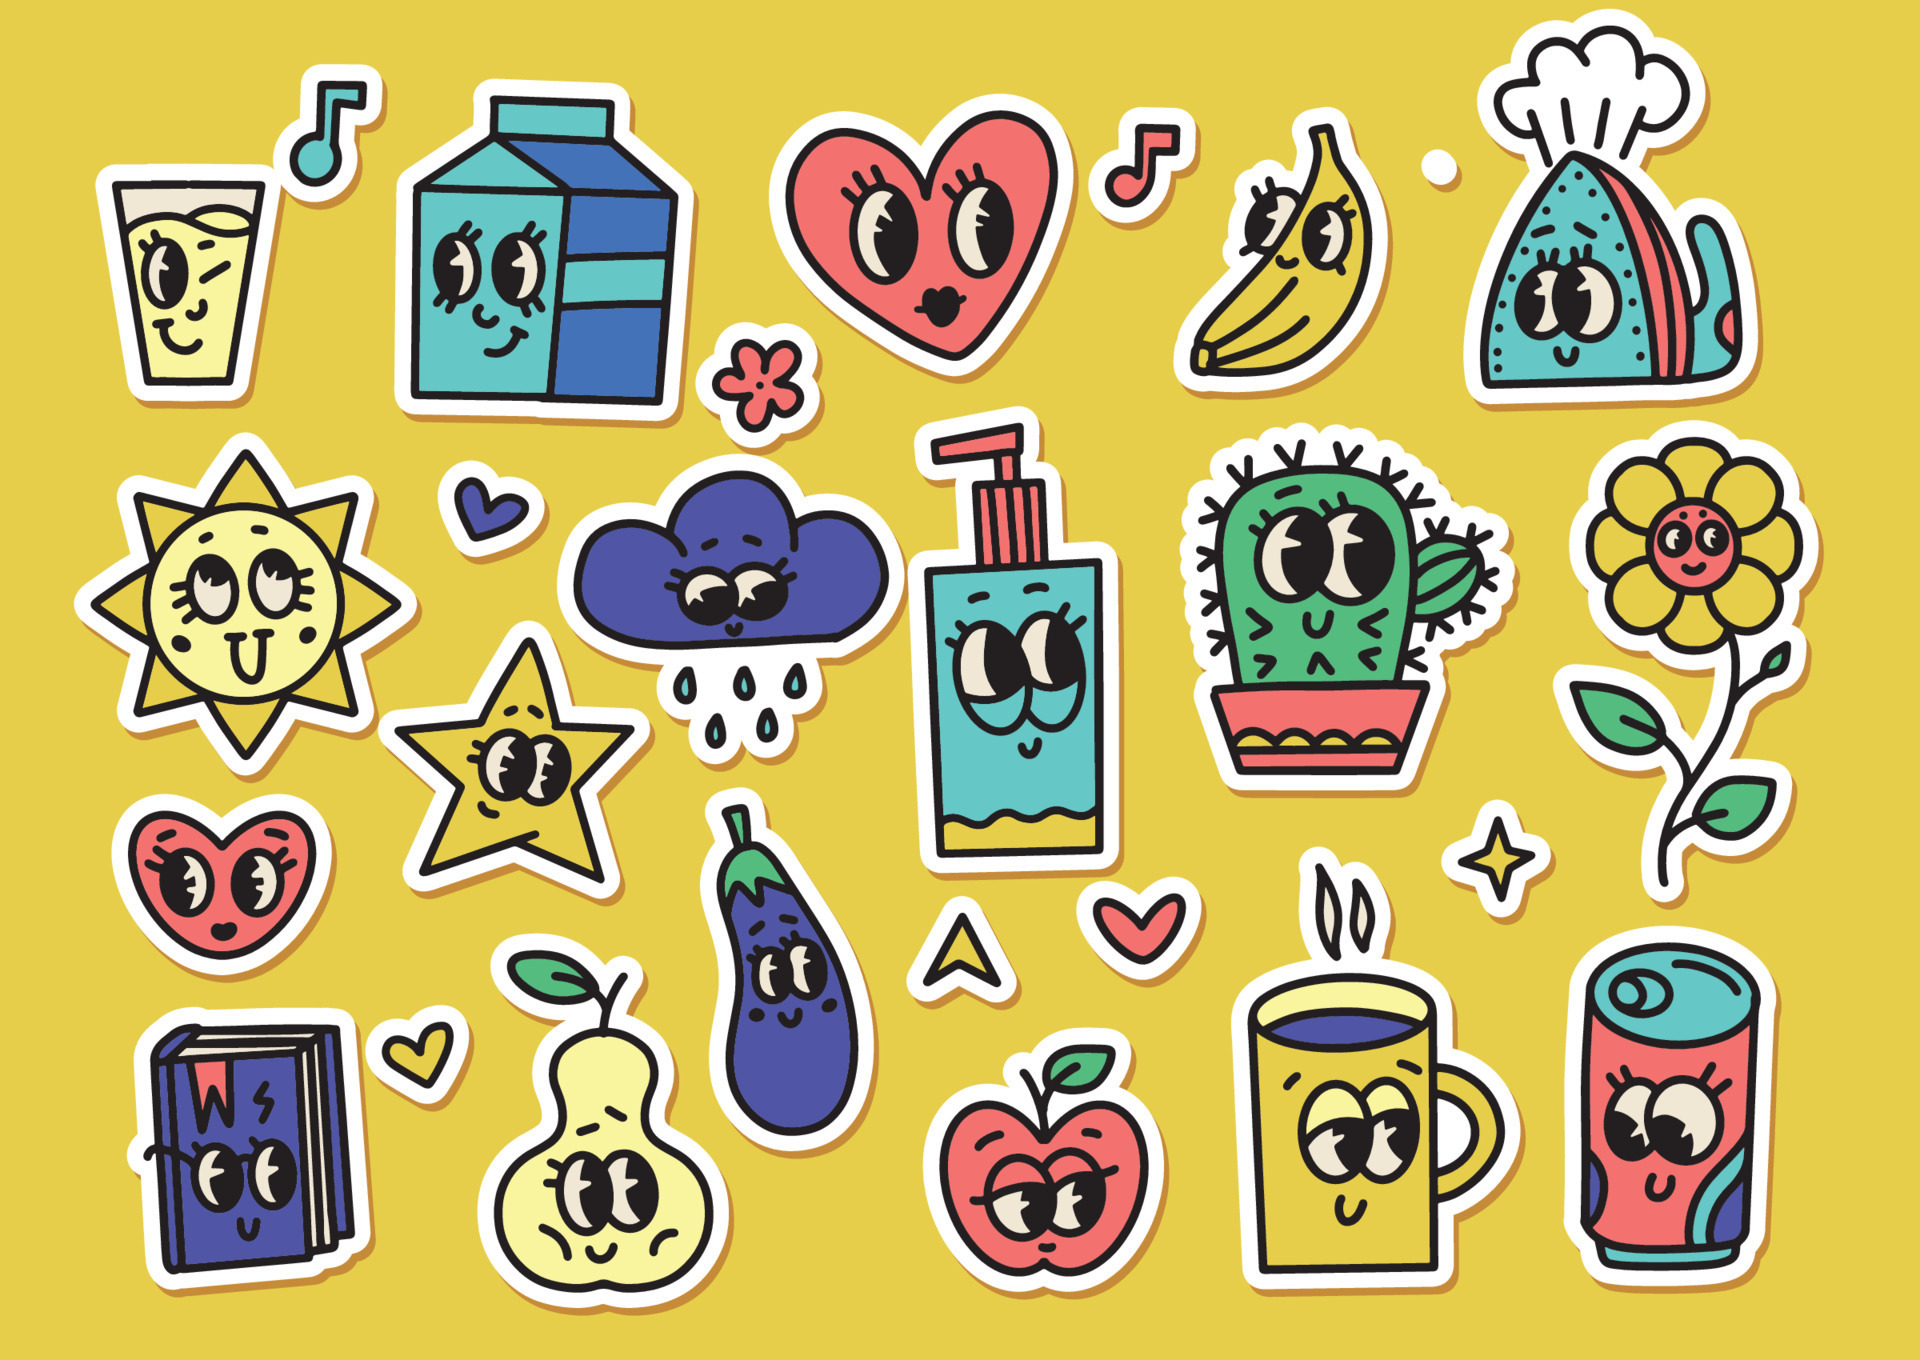 Big sticker pack of retro funny cartoon characters with big eyes. Vector  illustration of comic heart, sun, fruits, iron, book, cloud, flower,  abstract faces etc. Comic elements in trendy vintage style 8469388